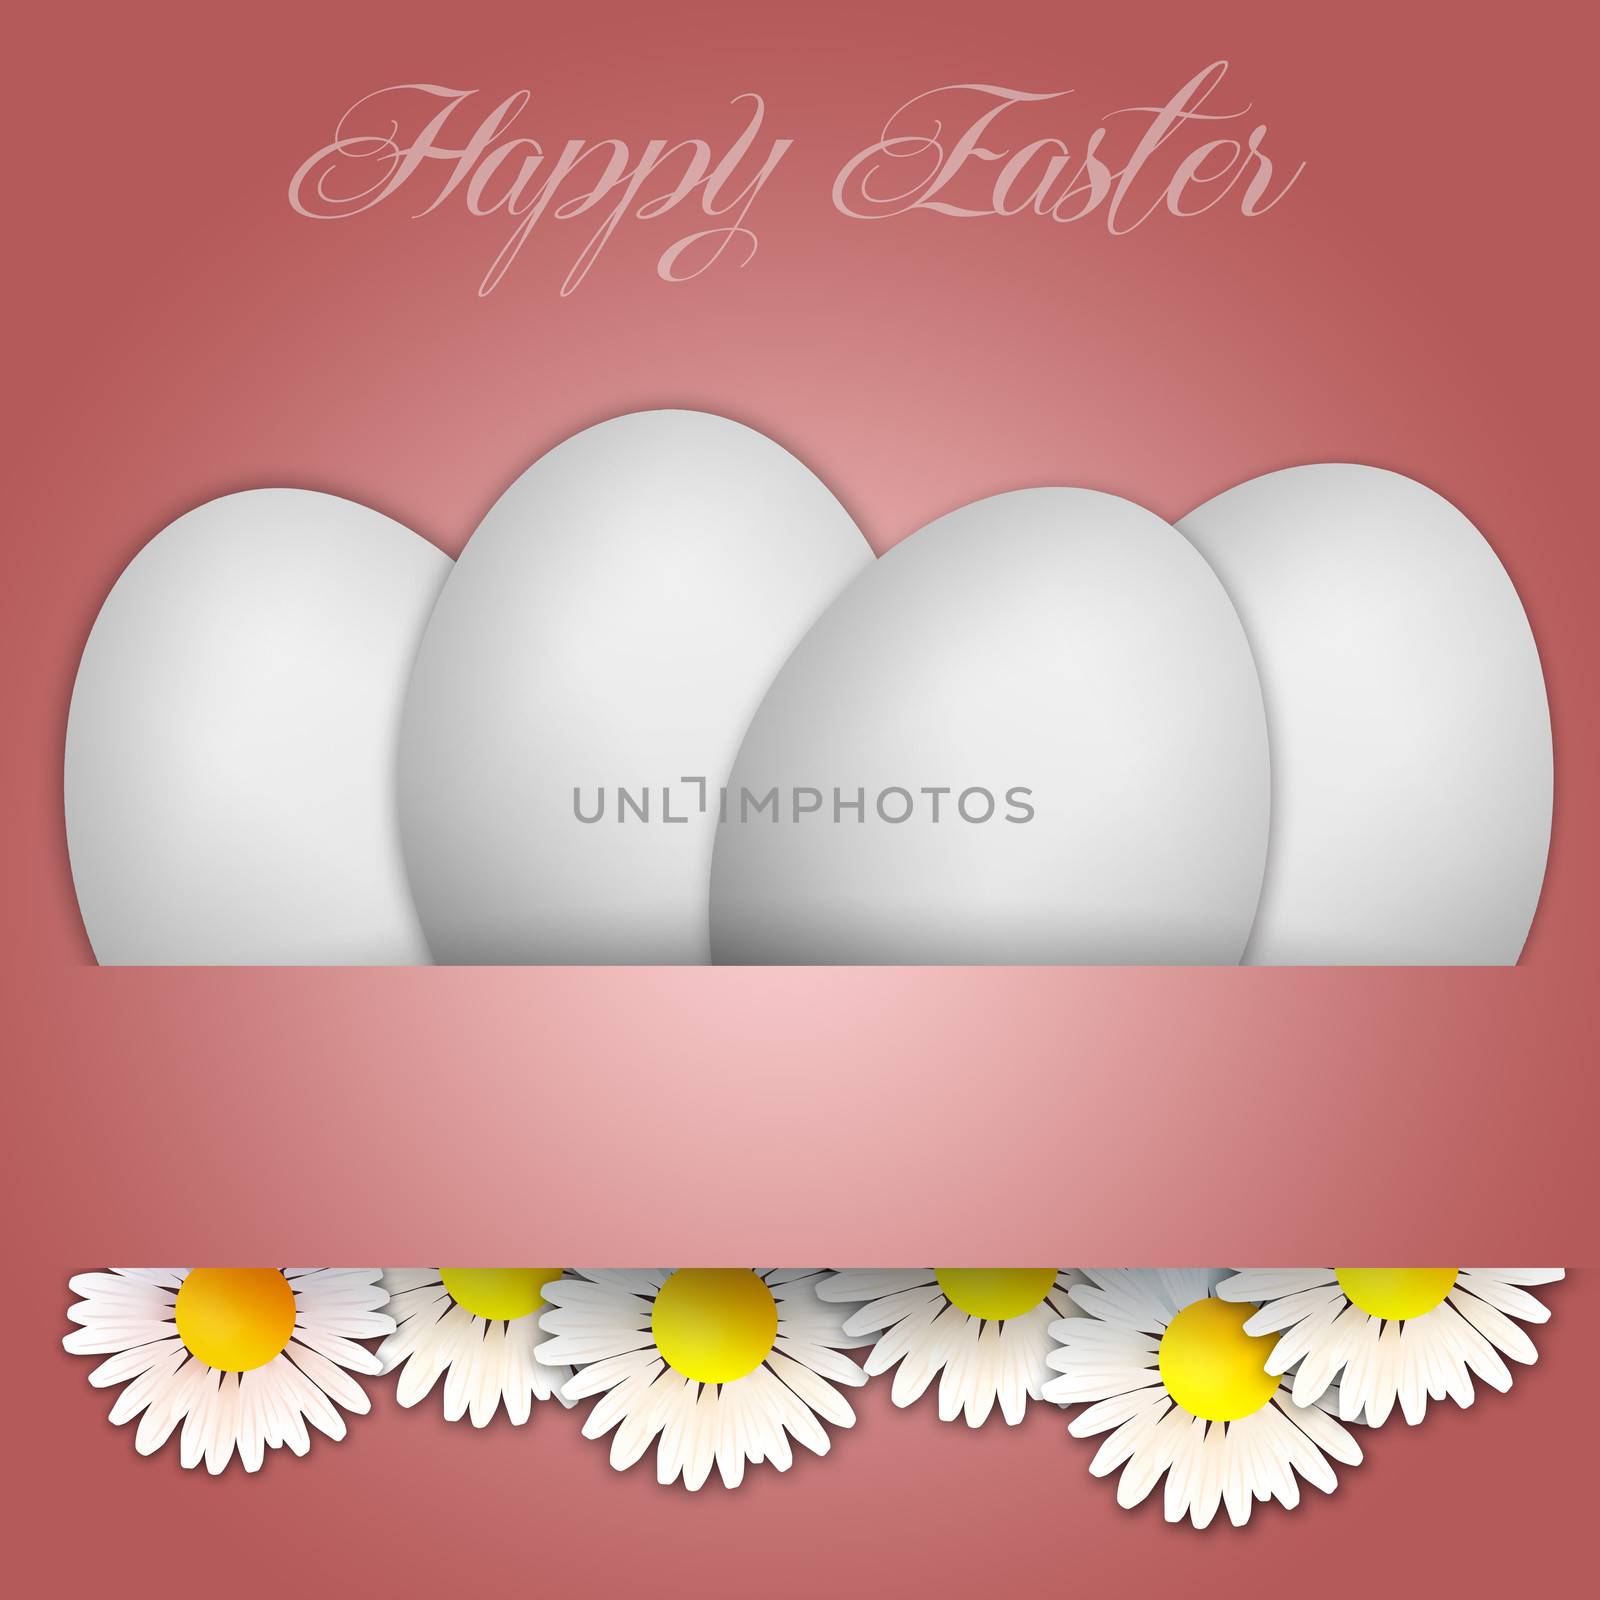 Illustration of Eggs and daisies for Easter